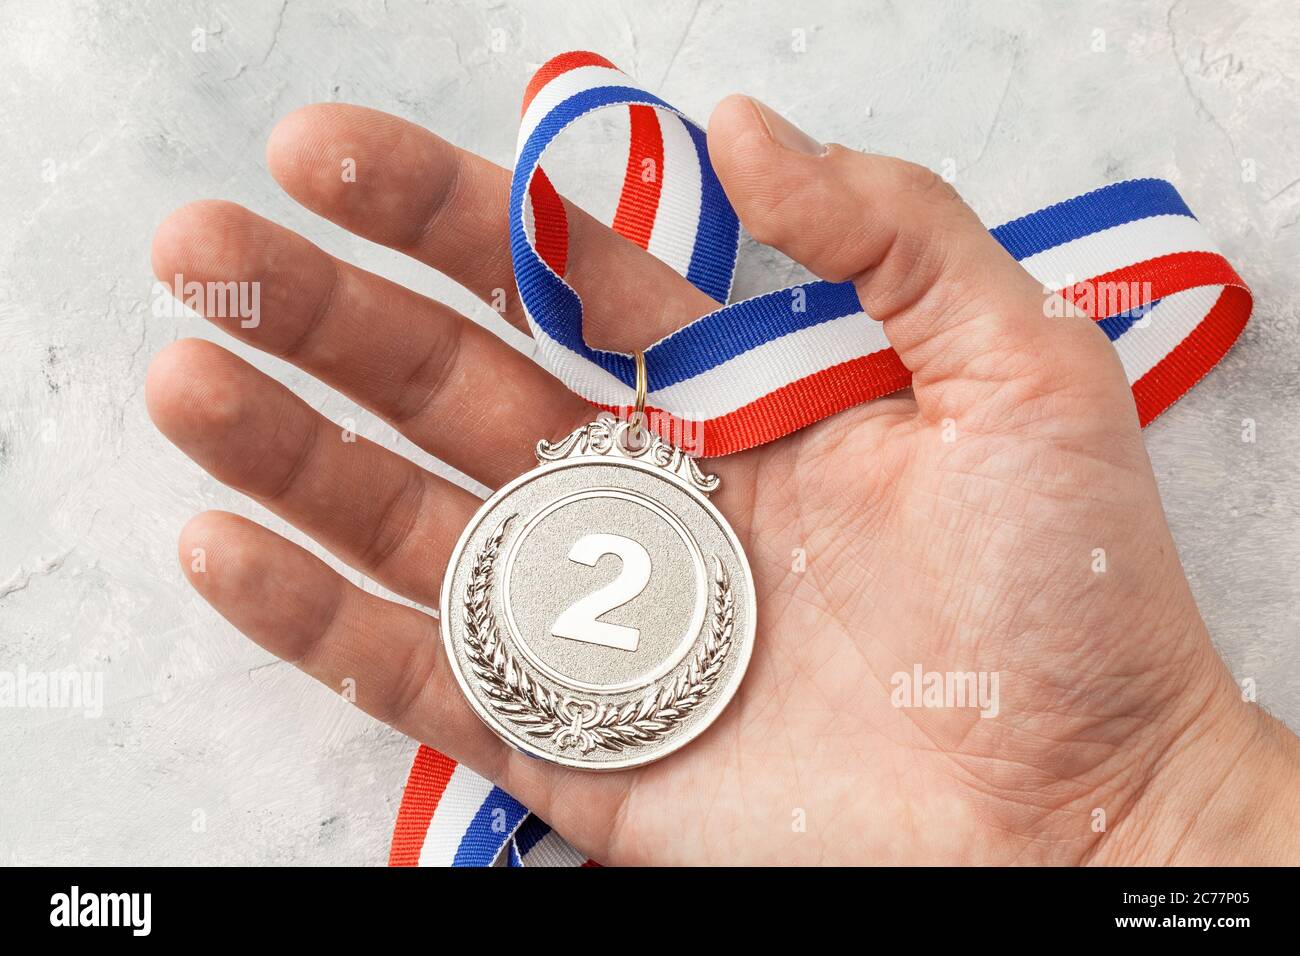 Silver Medal The Second Place Award With A Ribbon A Man Holds In His Hand Stock Photo Alamy